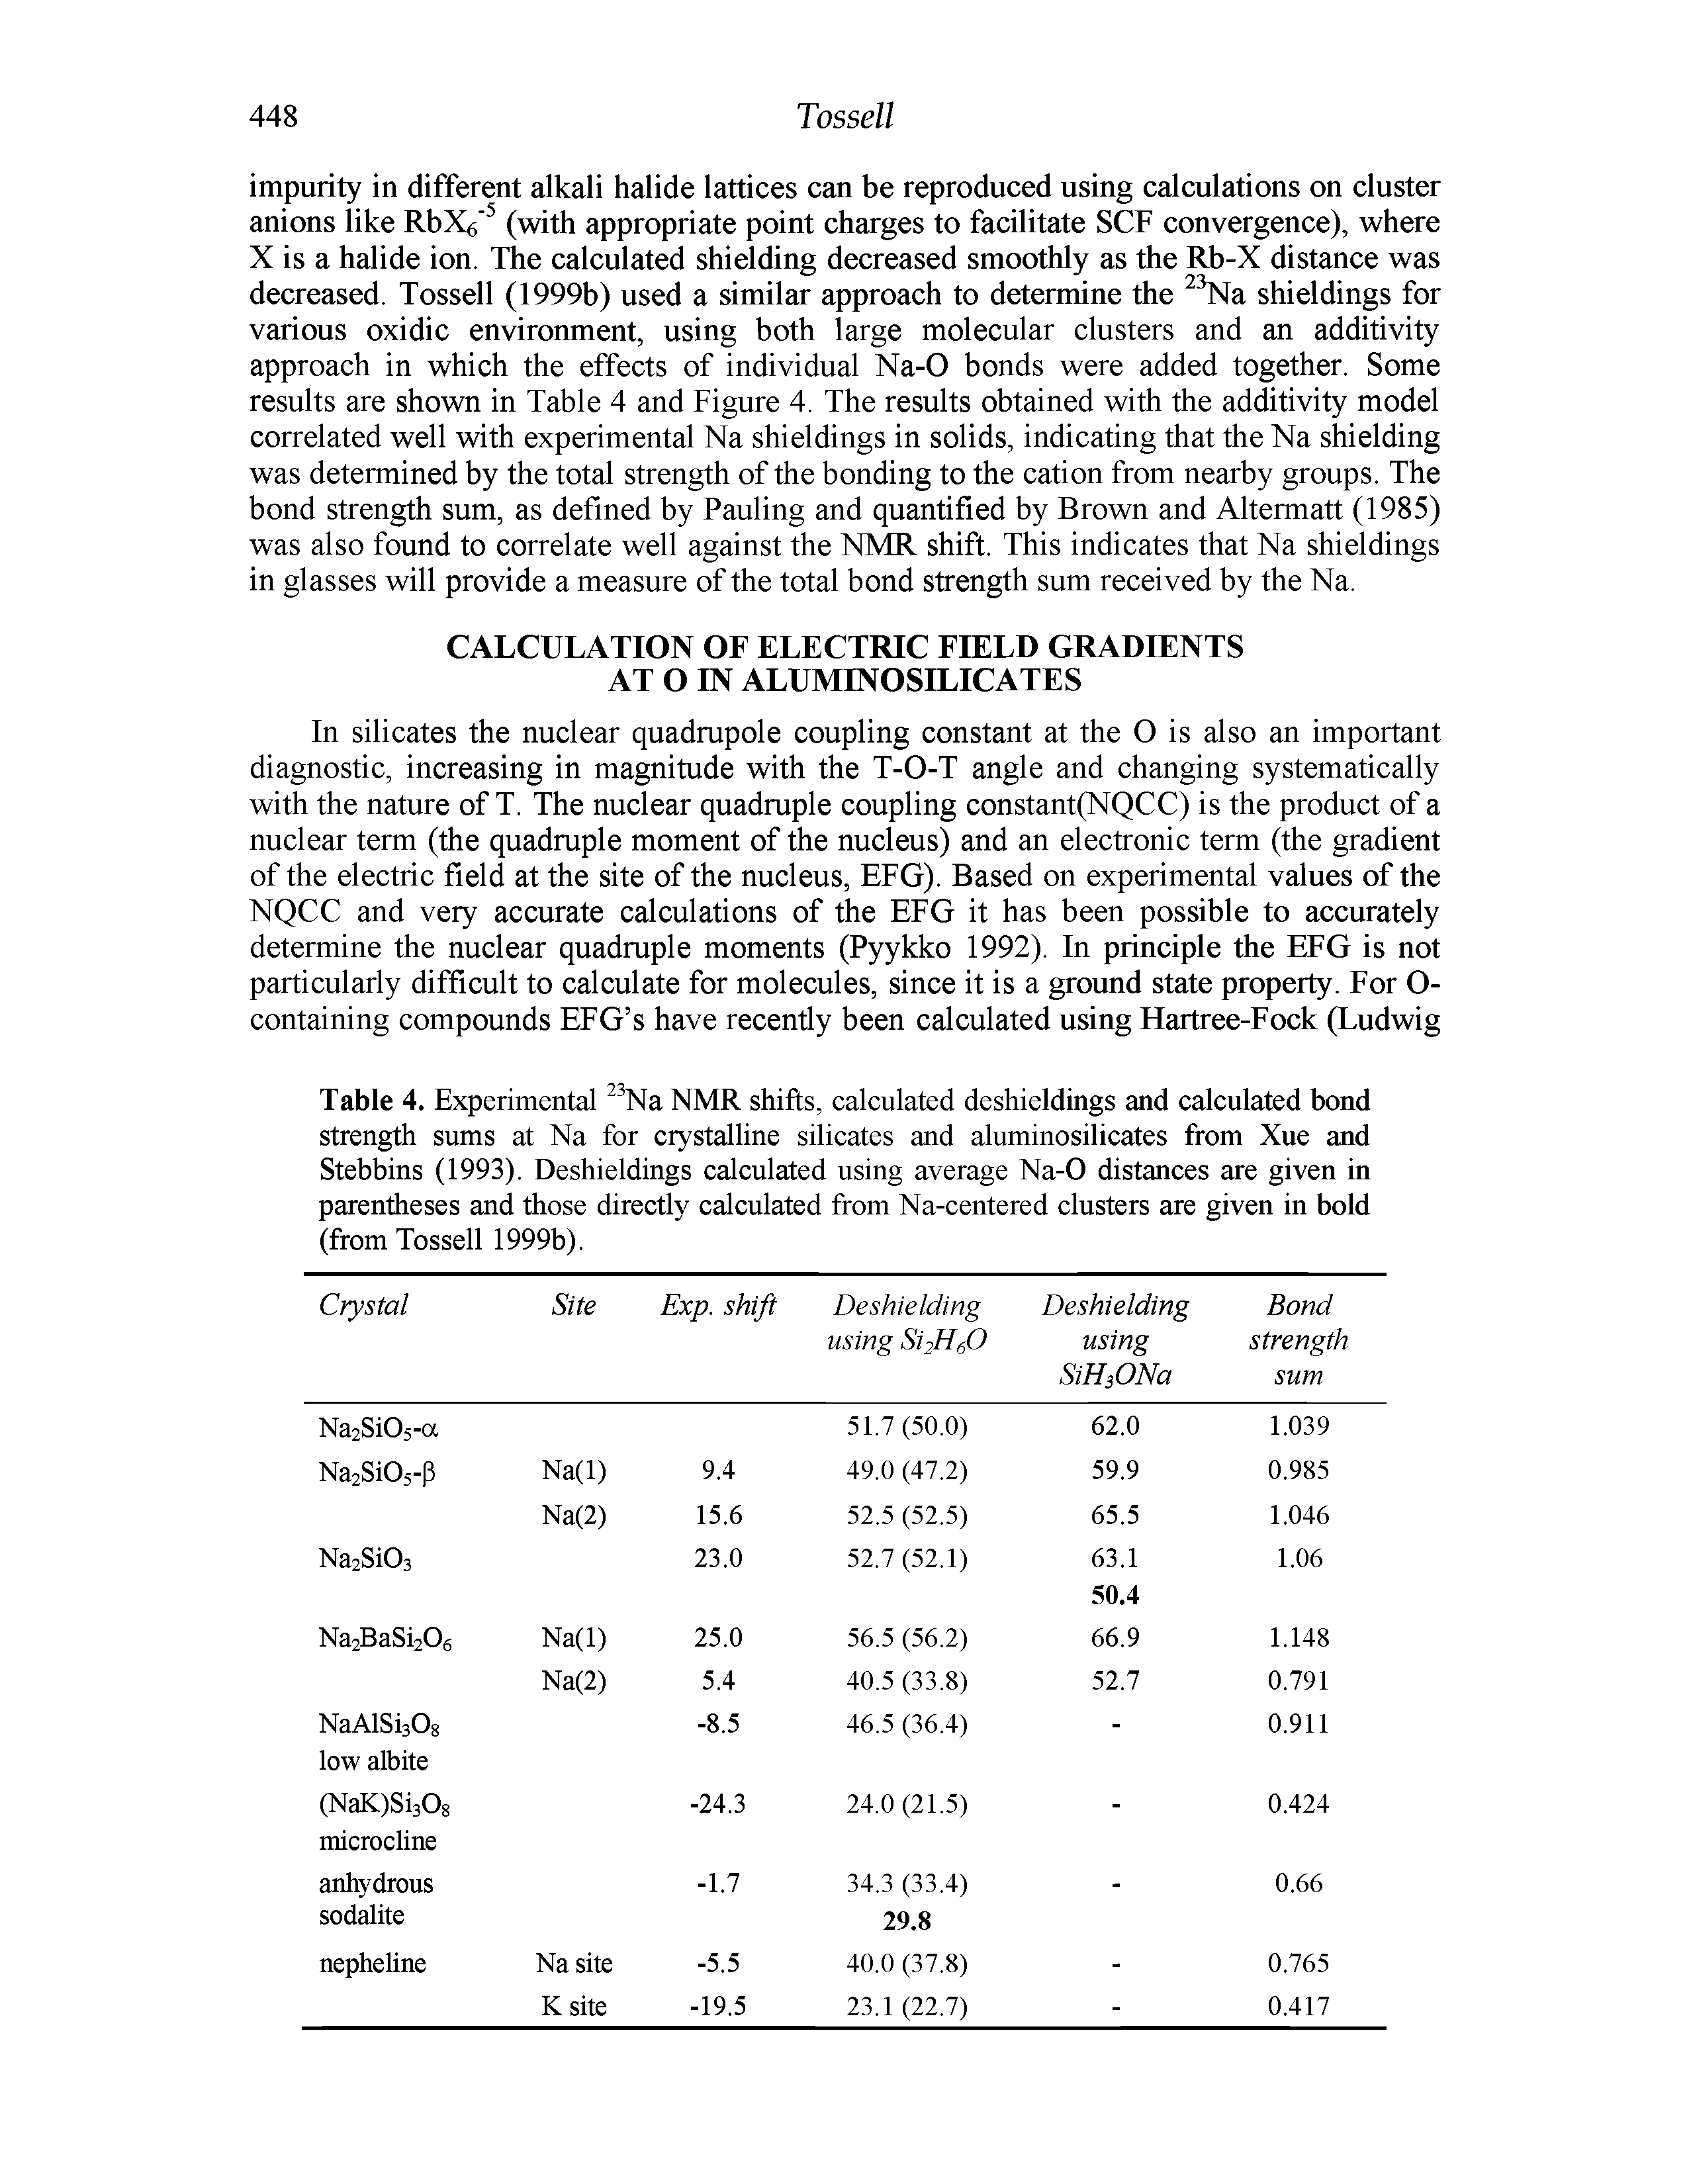 Table 4. Experimental NMR shifts, calculated deshieldings and calculated bond strength siuns at Na for crystalline silicates and aluminosilicates from Xue and Stebbins (1993). Deshieldings calculated using average Na-0 distances are given in parenlheses and those directly calculated from Na-centered clusters are given in bold (from Tossell 1999b).